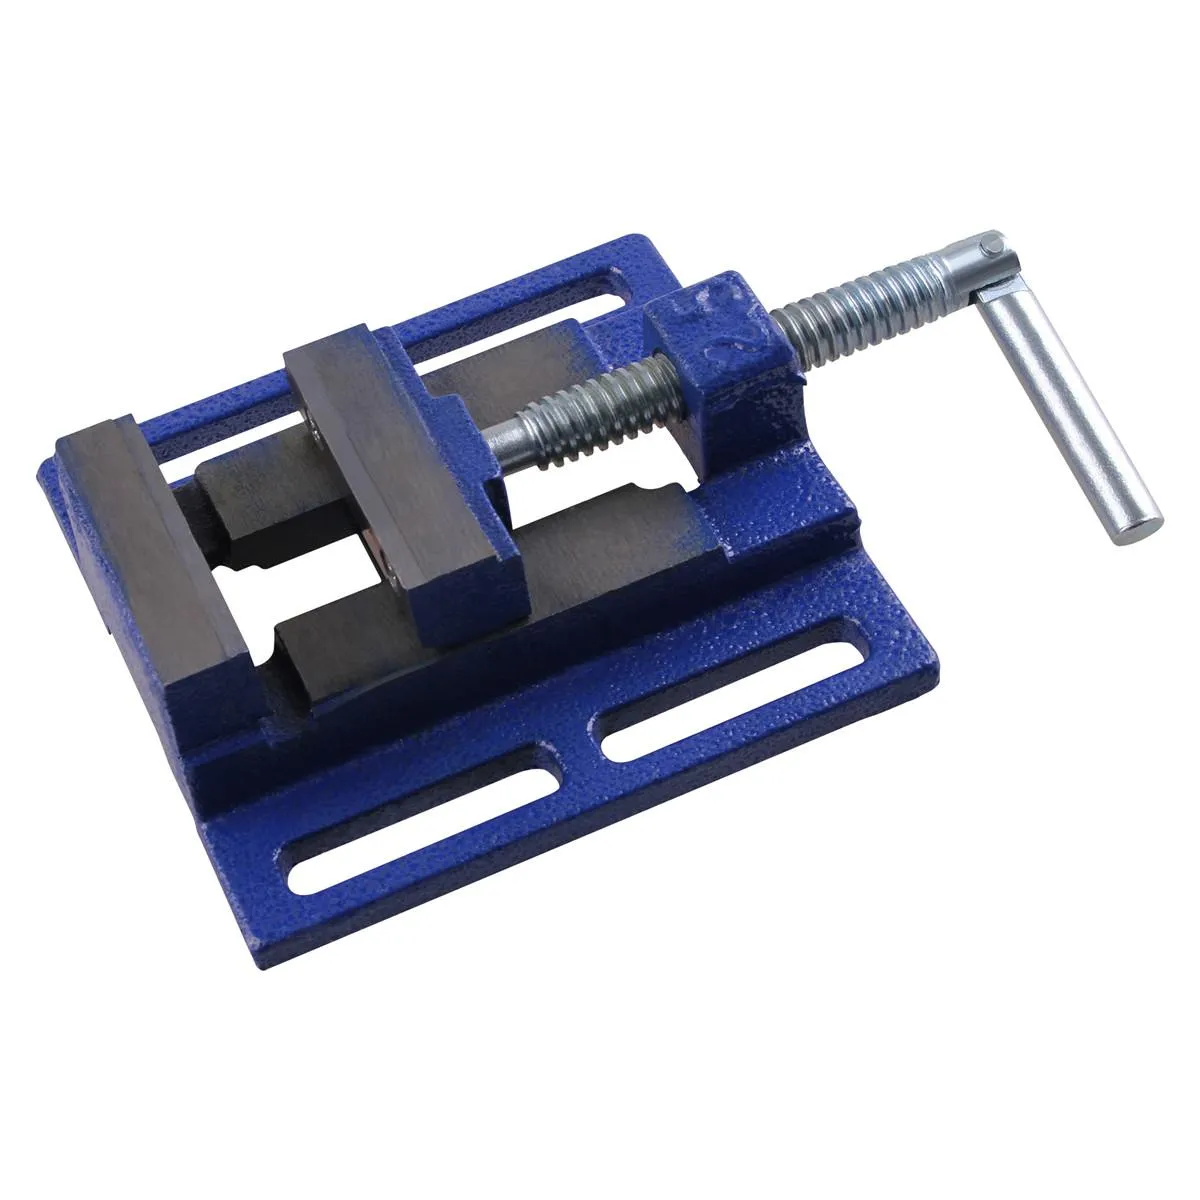 Bankschroef 2.5/3 Inch Drill Press Vise Milling Drilling Clamp Hine Vise Tool Workshop Tool Hine Tools Accessories